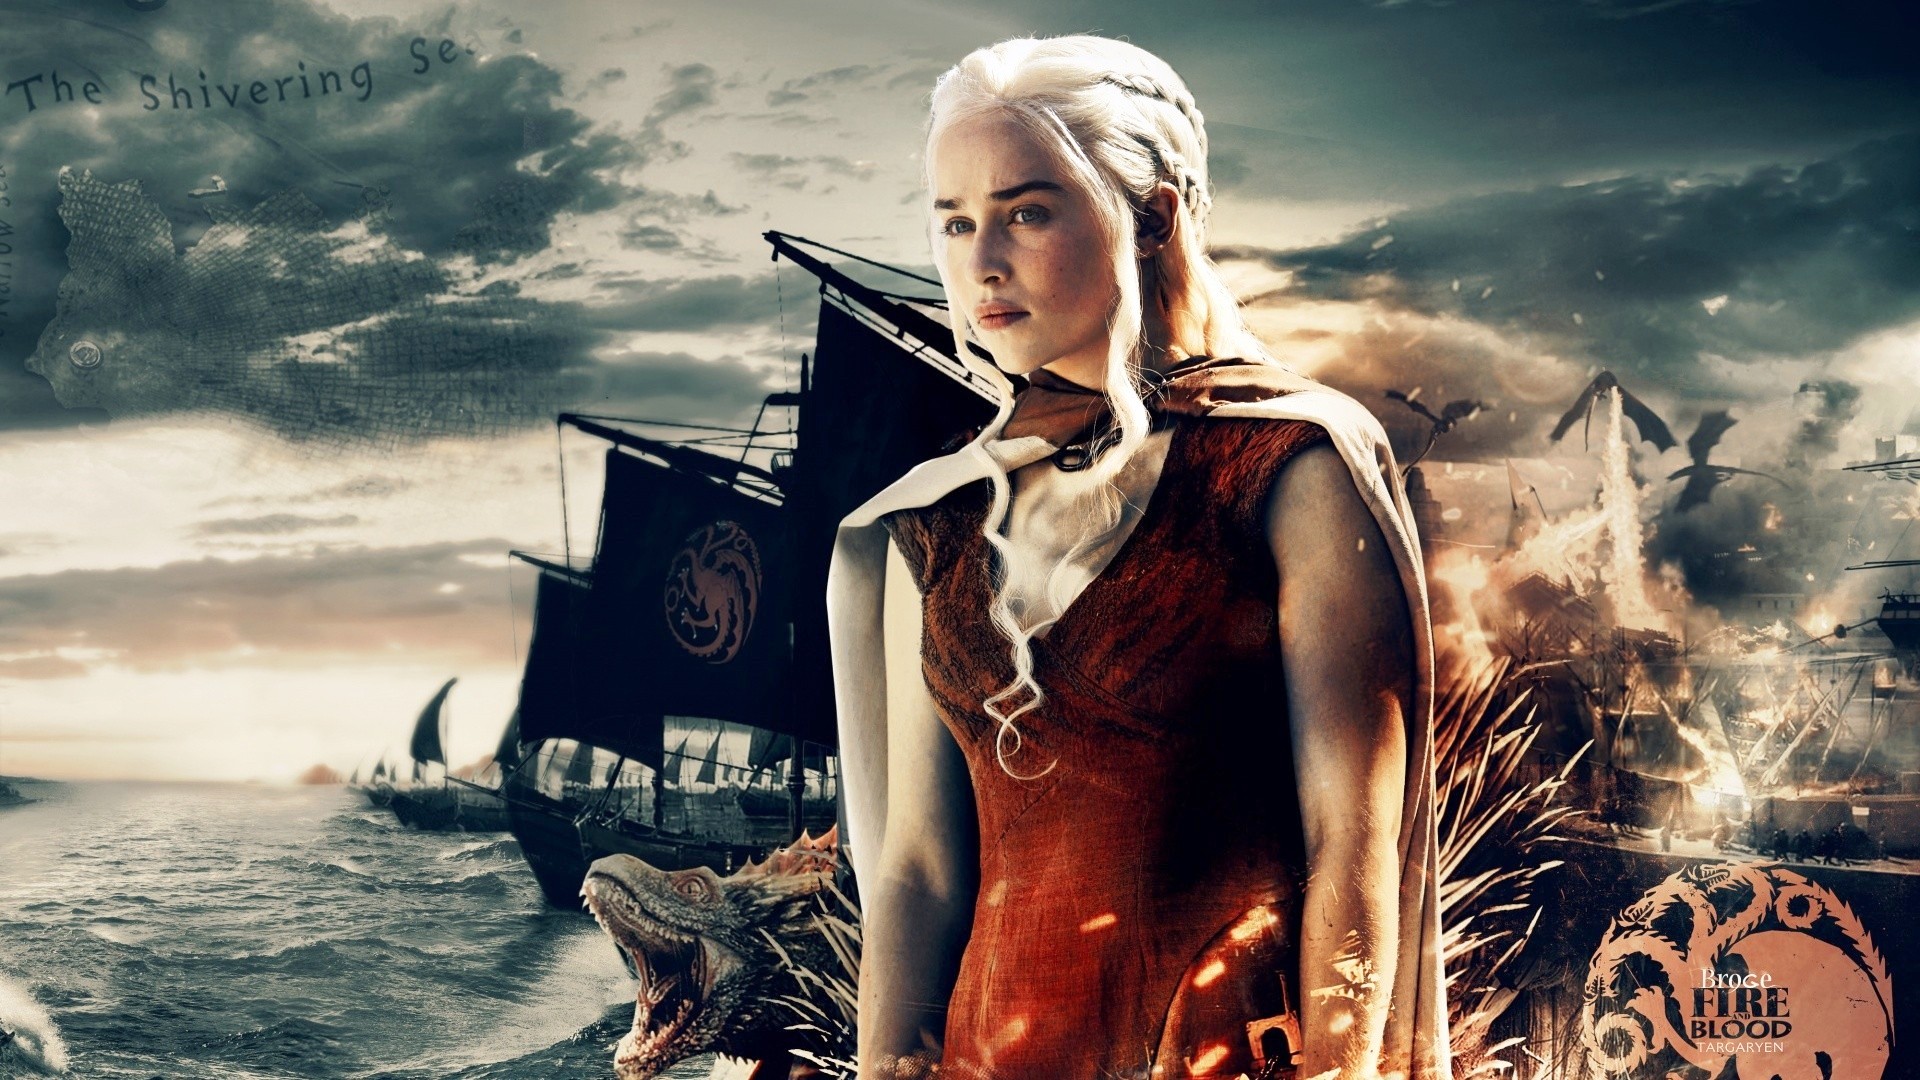 Game of Thrones Daenerys Targaryen Wallpaper HD with high-resolution 1920x1080 pixel. You can use this poster wallpaper for your Desktop Computers, Mac Screensavers, Windows Backgrounds, iPhone Wallpapers, Tablet or Android Lock screen and another Mobile device